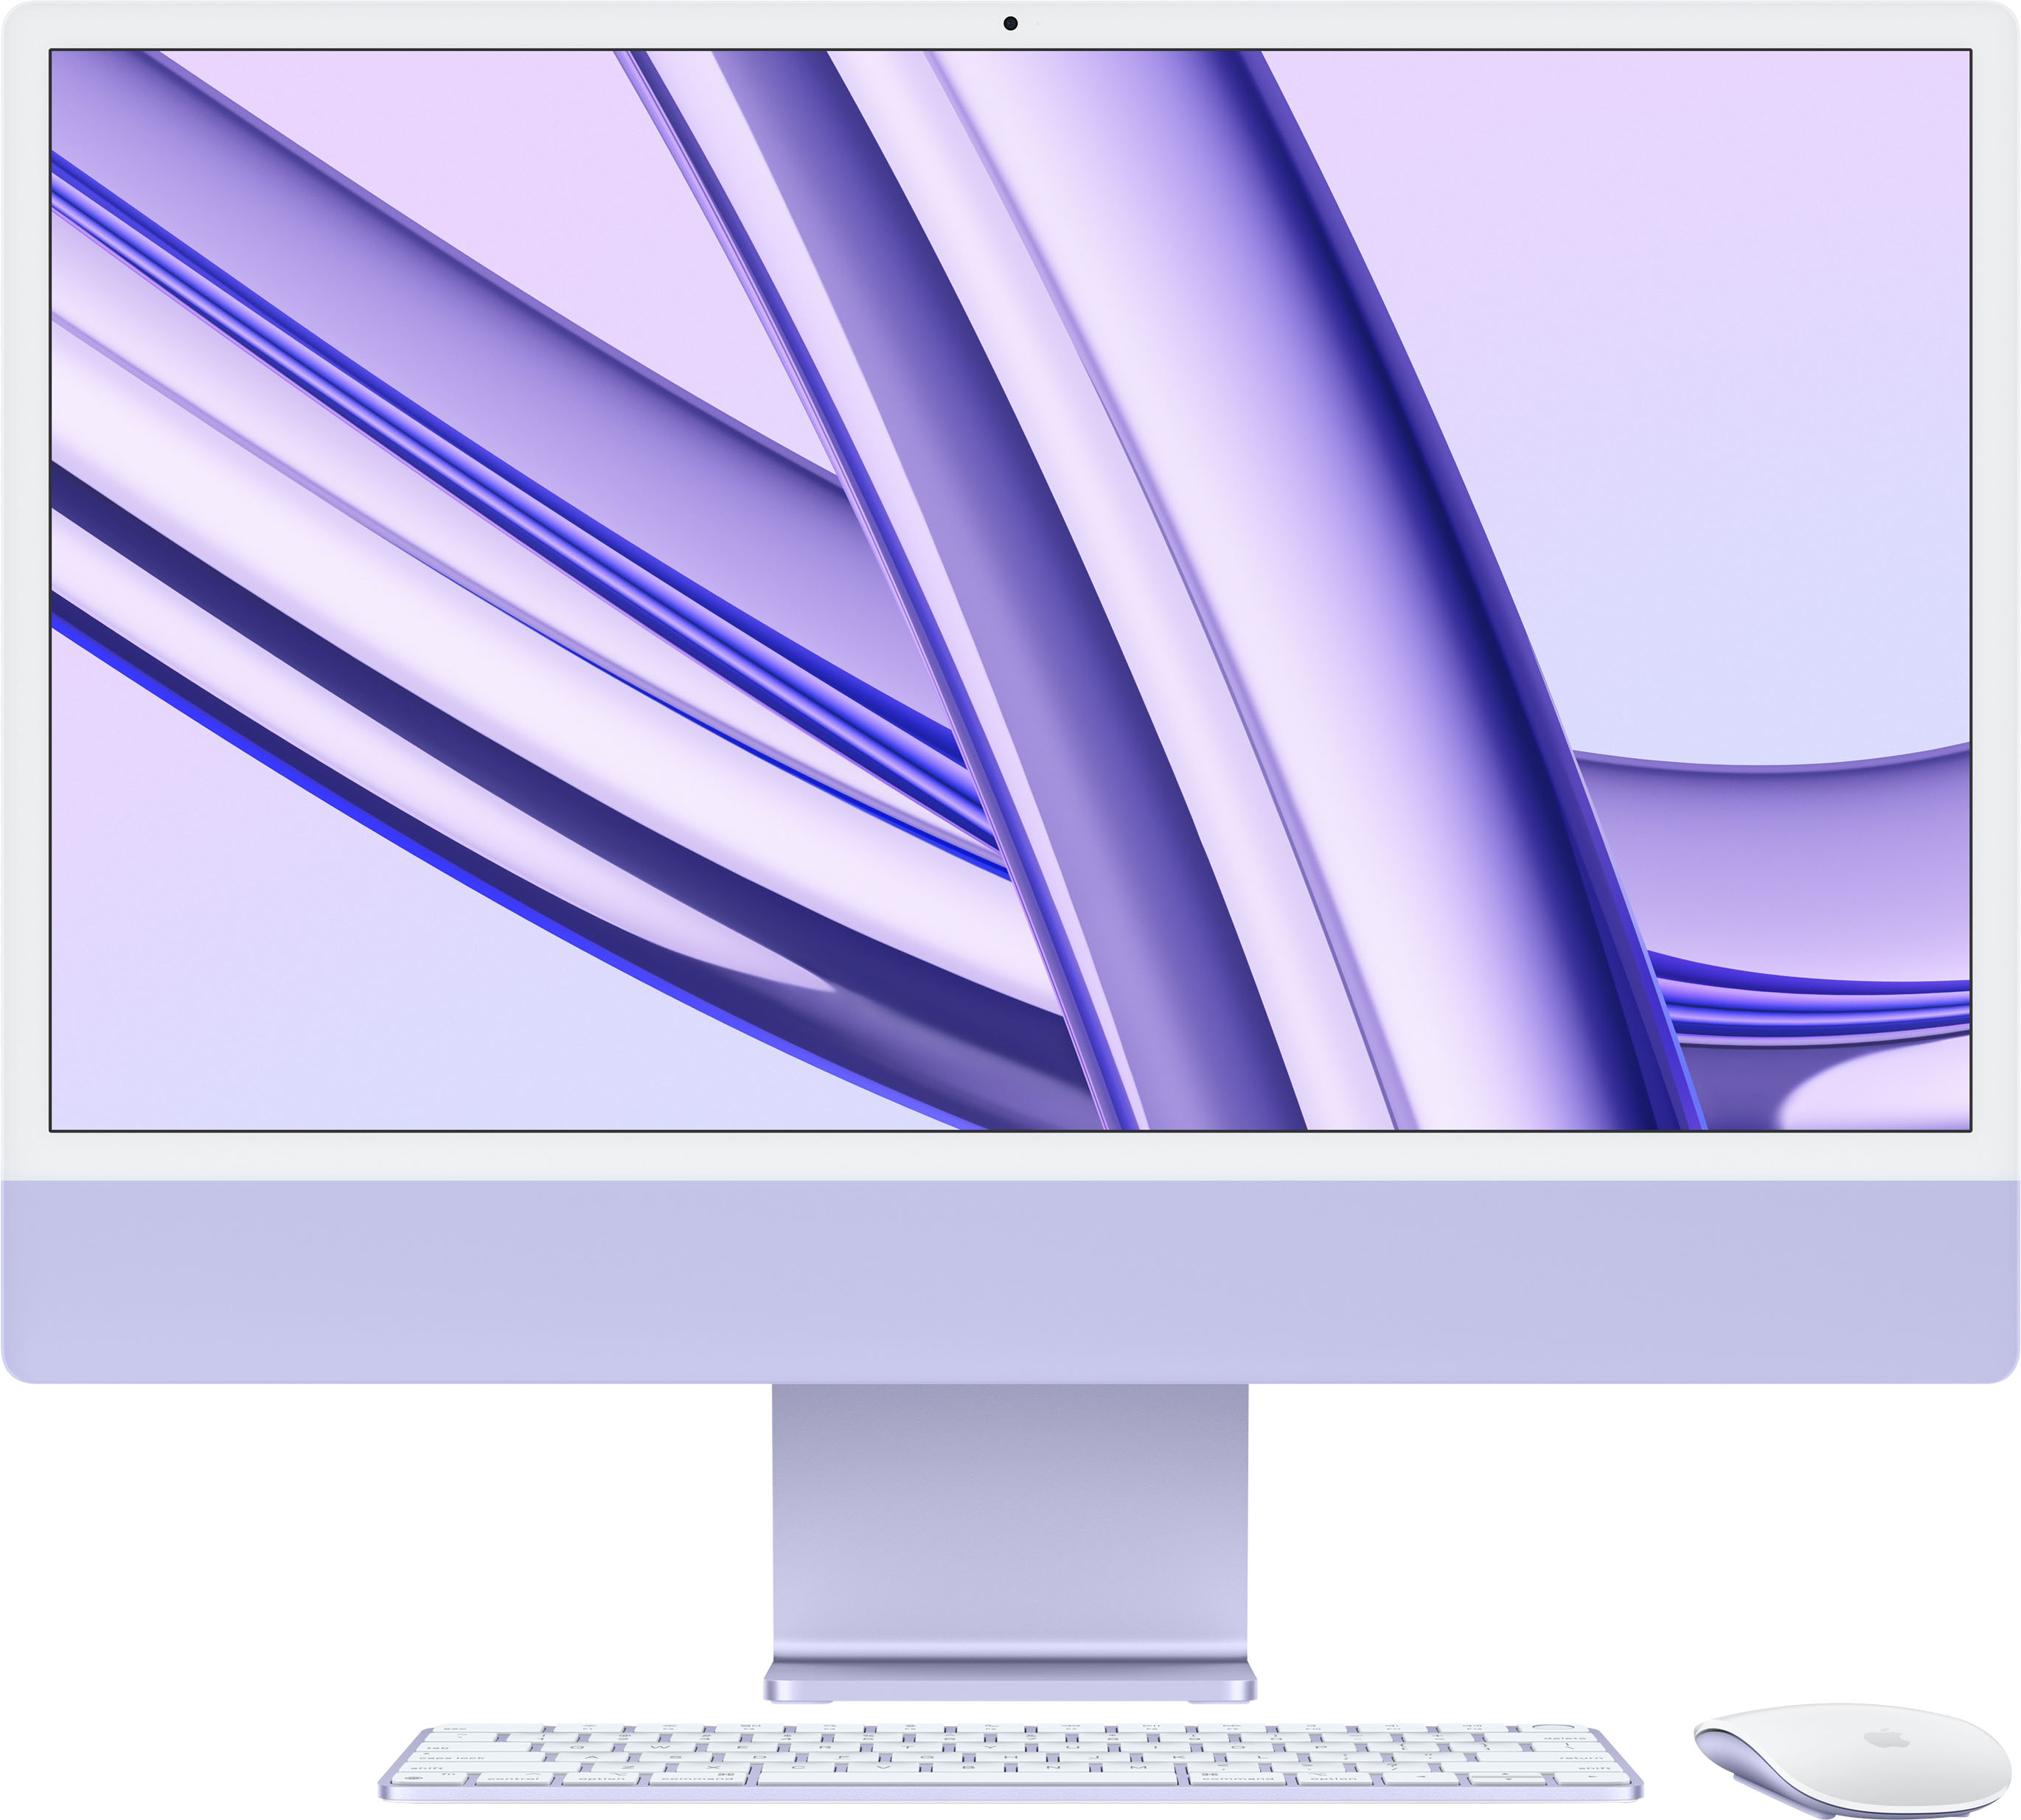 iMac features all-new design in vibrant colors, M1 chip, and 4.5K Retina  display - Apple